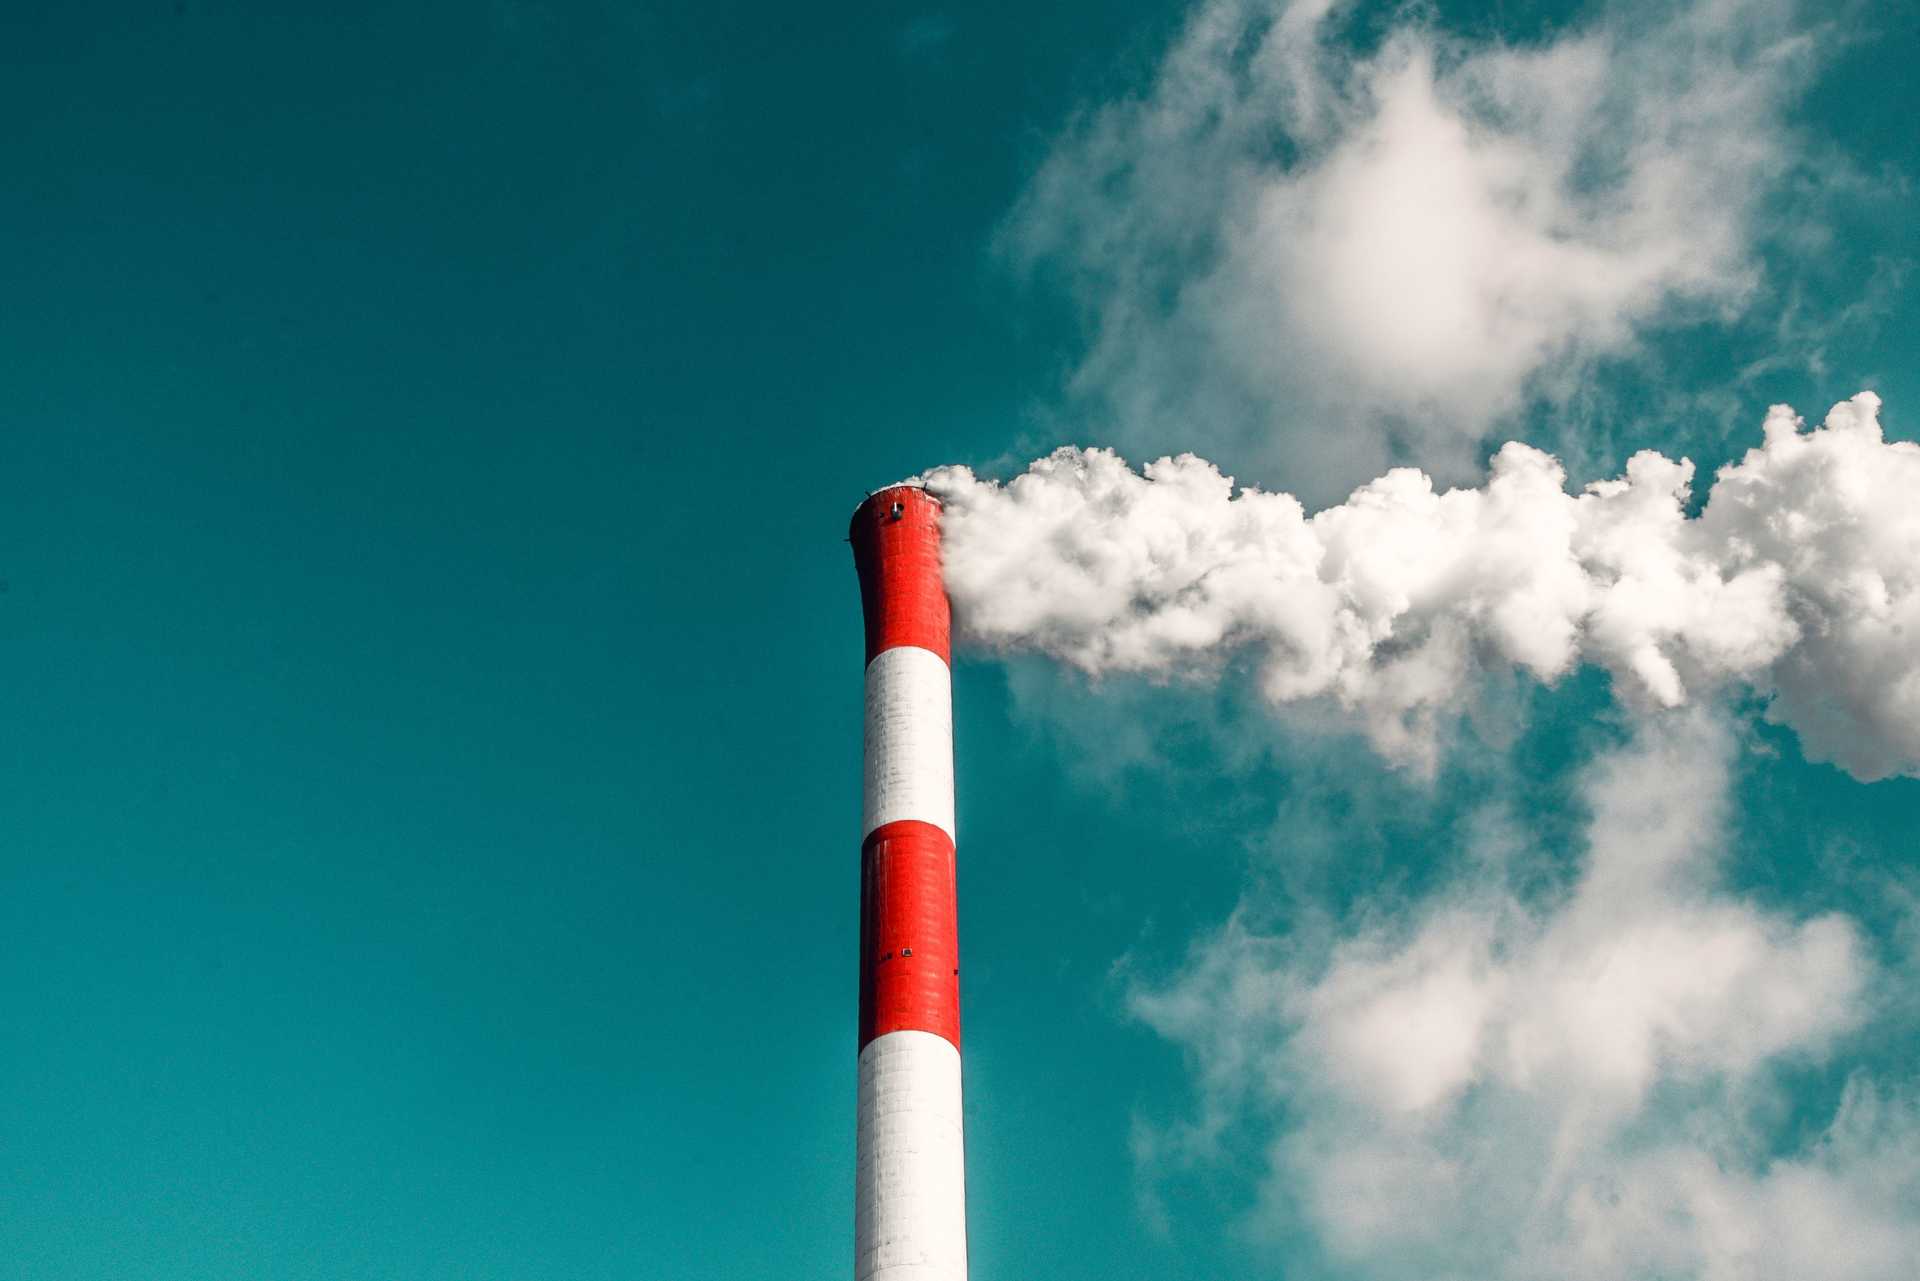 Chimney polluting the environment